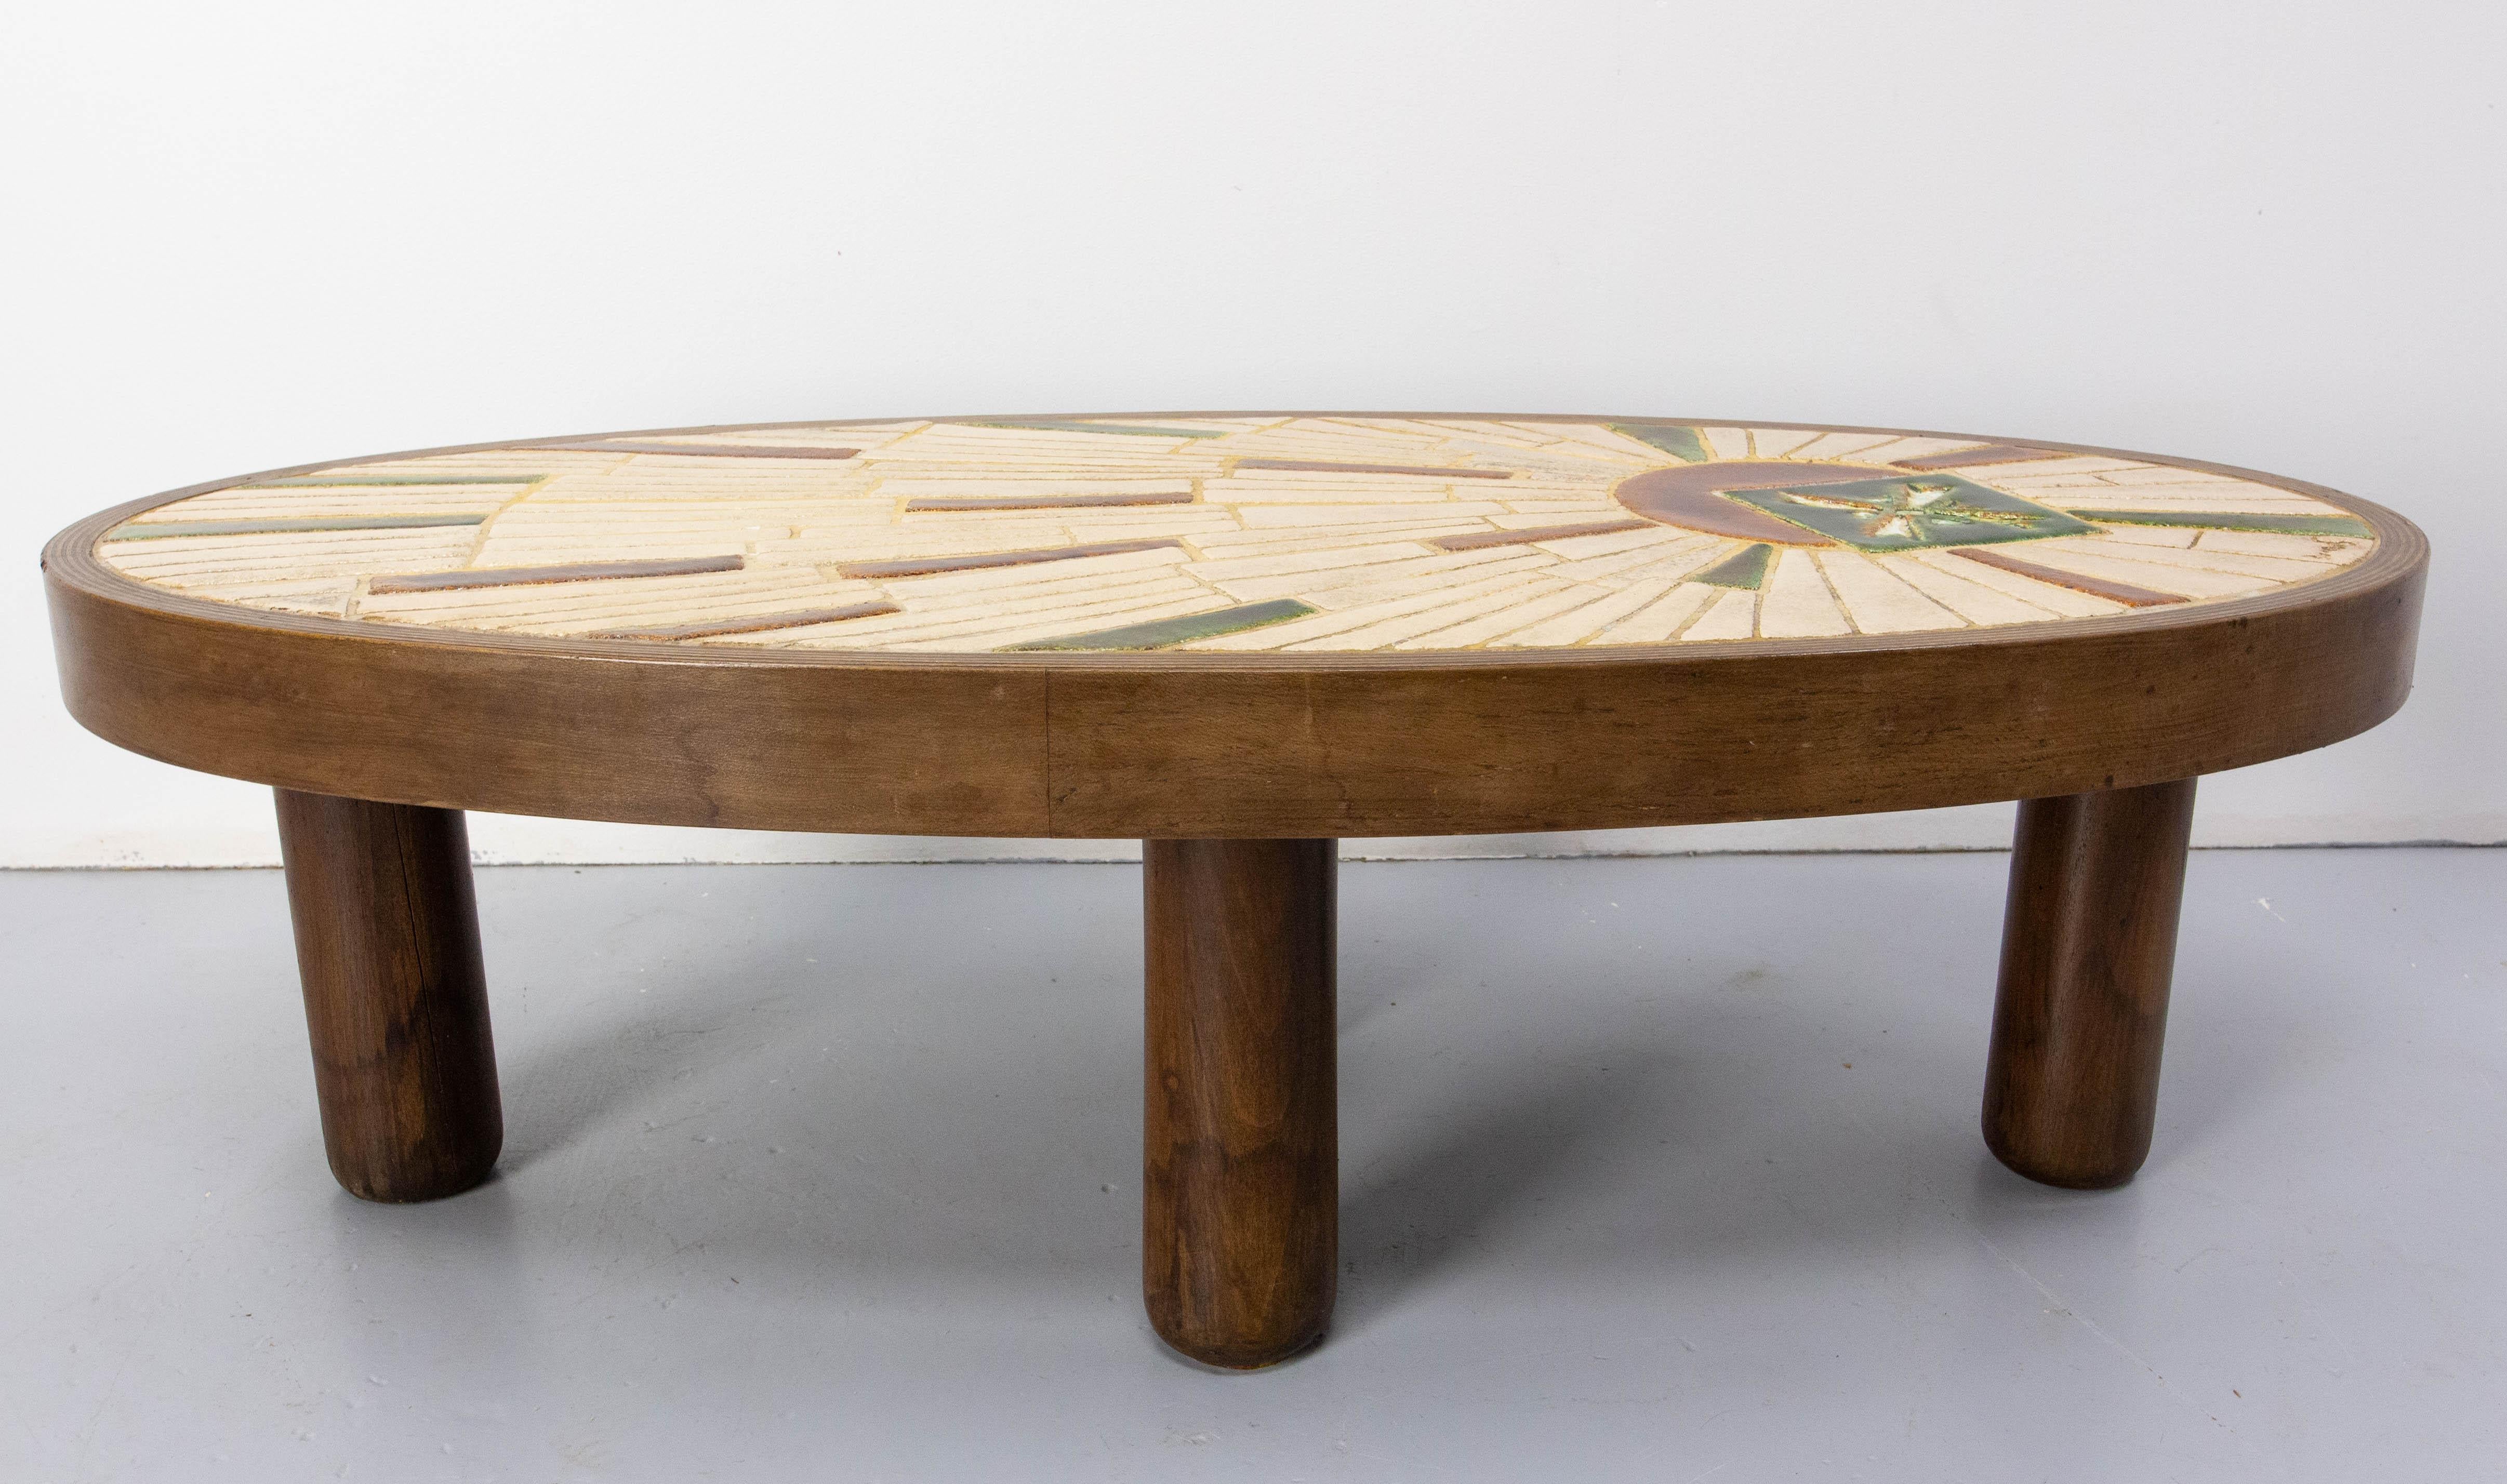 Beech and ceramic oval coffee table signed Barrois from Vallauris aera in the South of France.
Made between 1960 and 1970.
The table's four legs are arranged in an original way, so that it appears to have only three!
Water marks on the